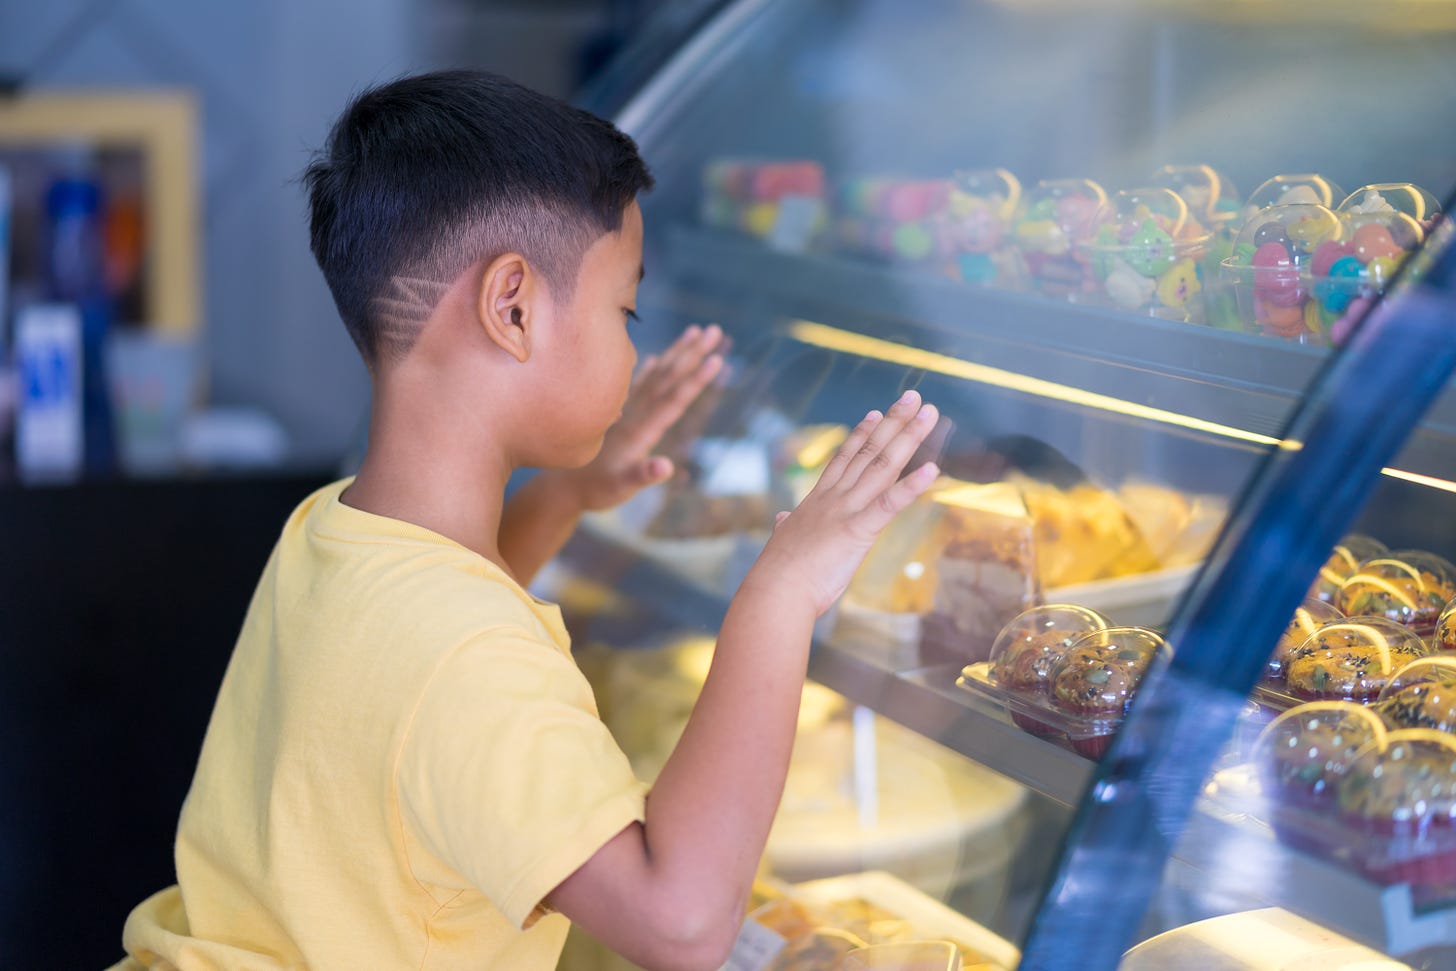 Young Asian boy deciding on a treat at the bakery counter